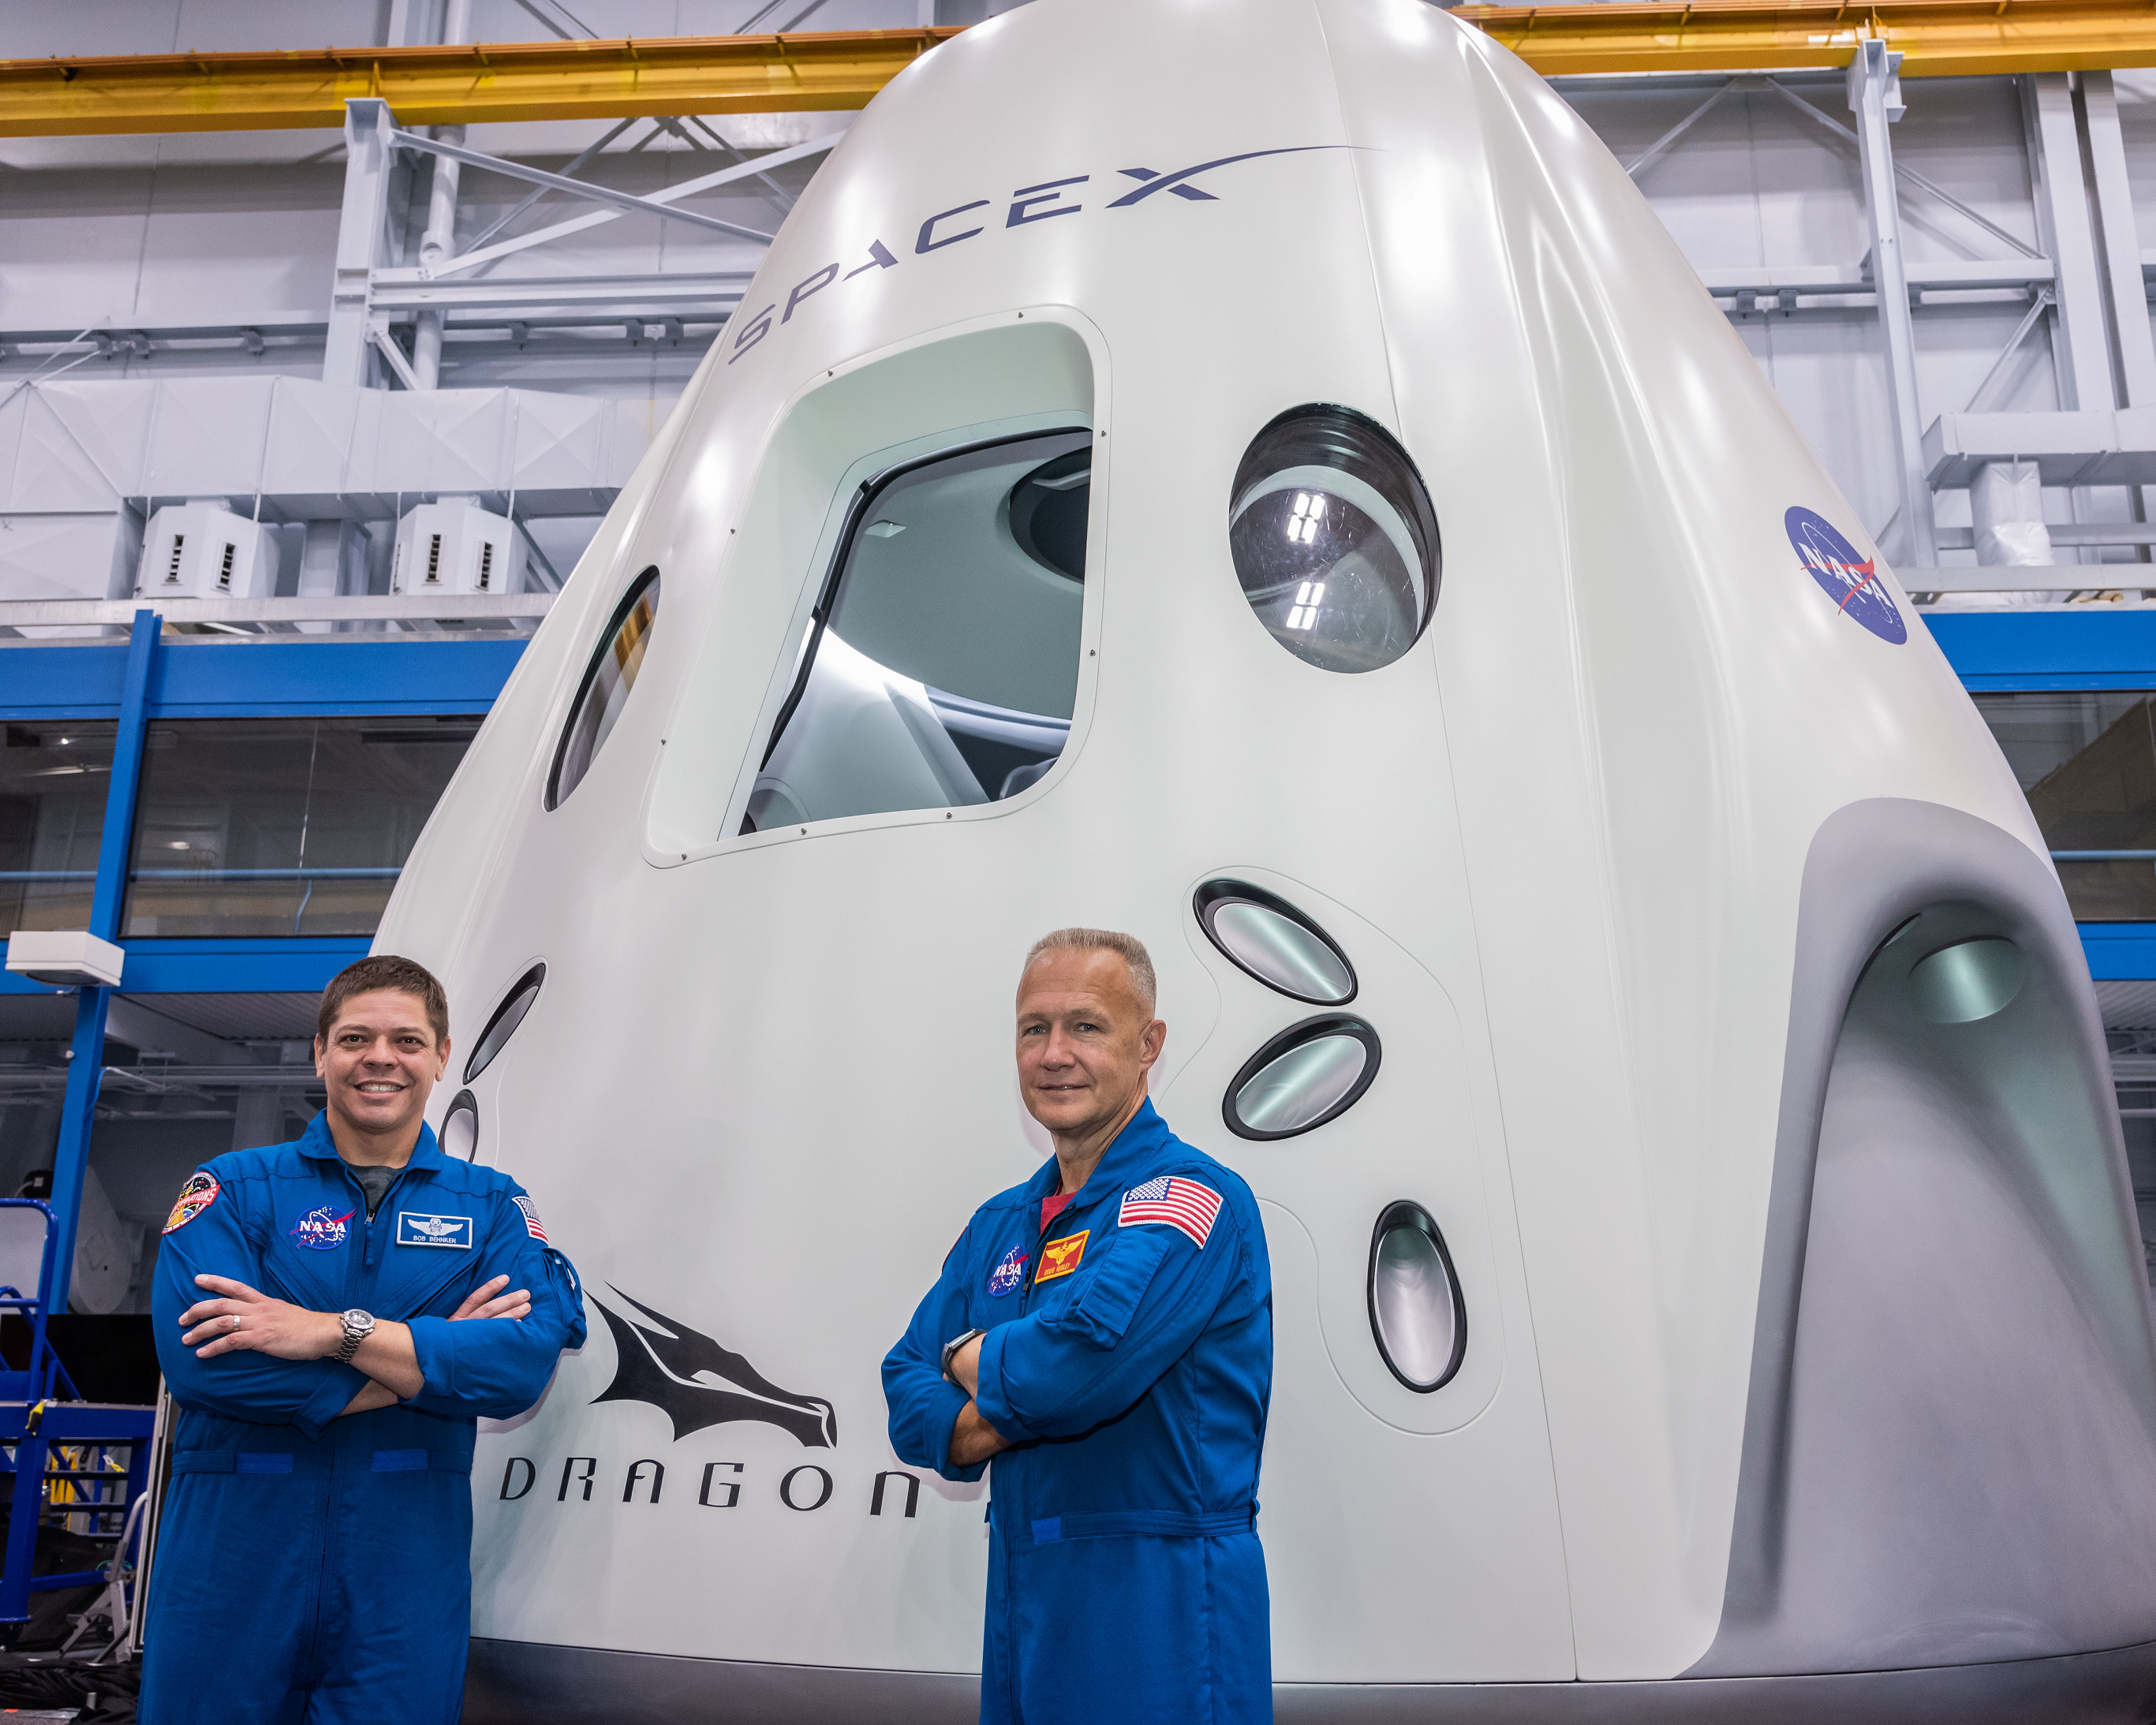 Dragon Shuttle with astronauts